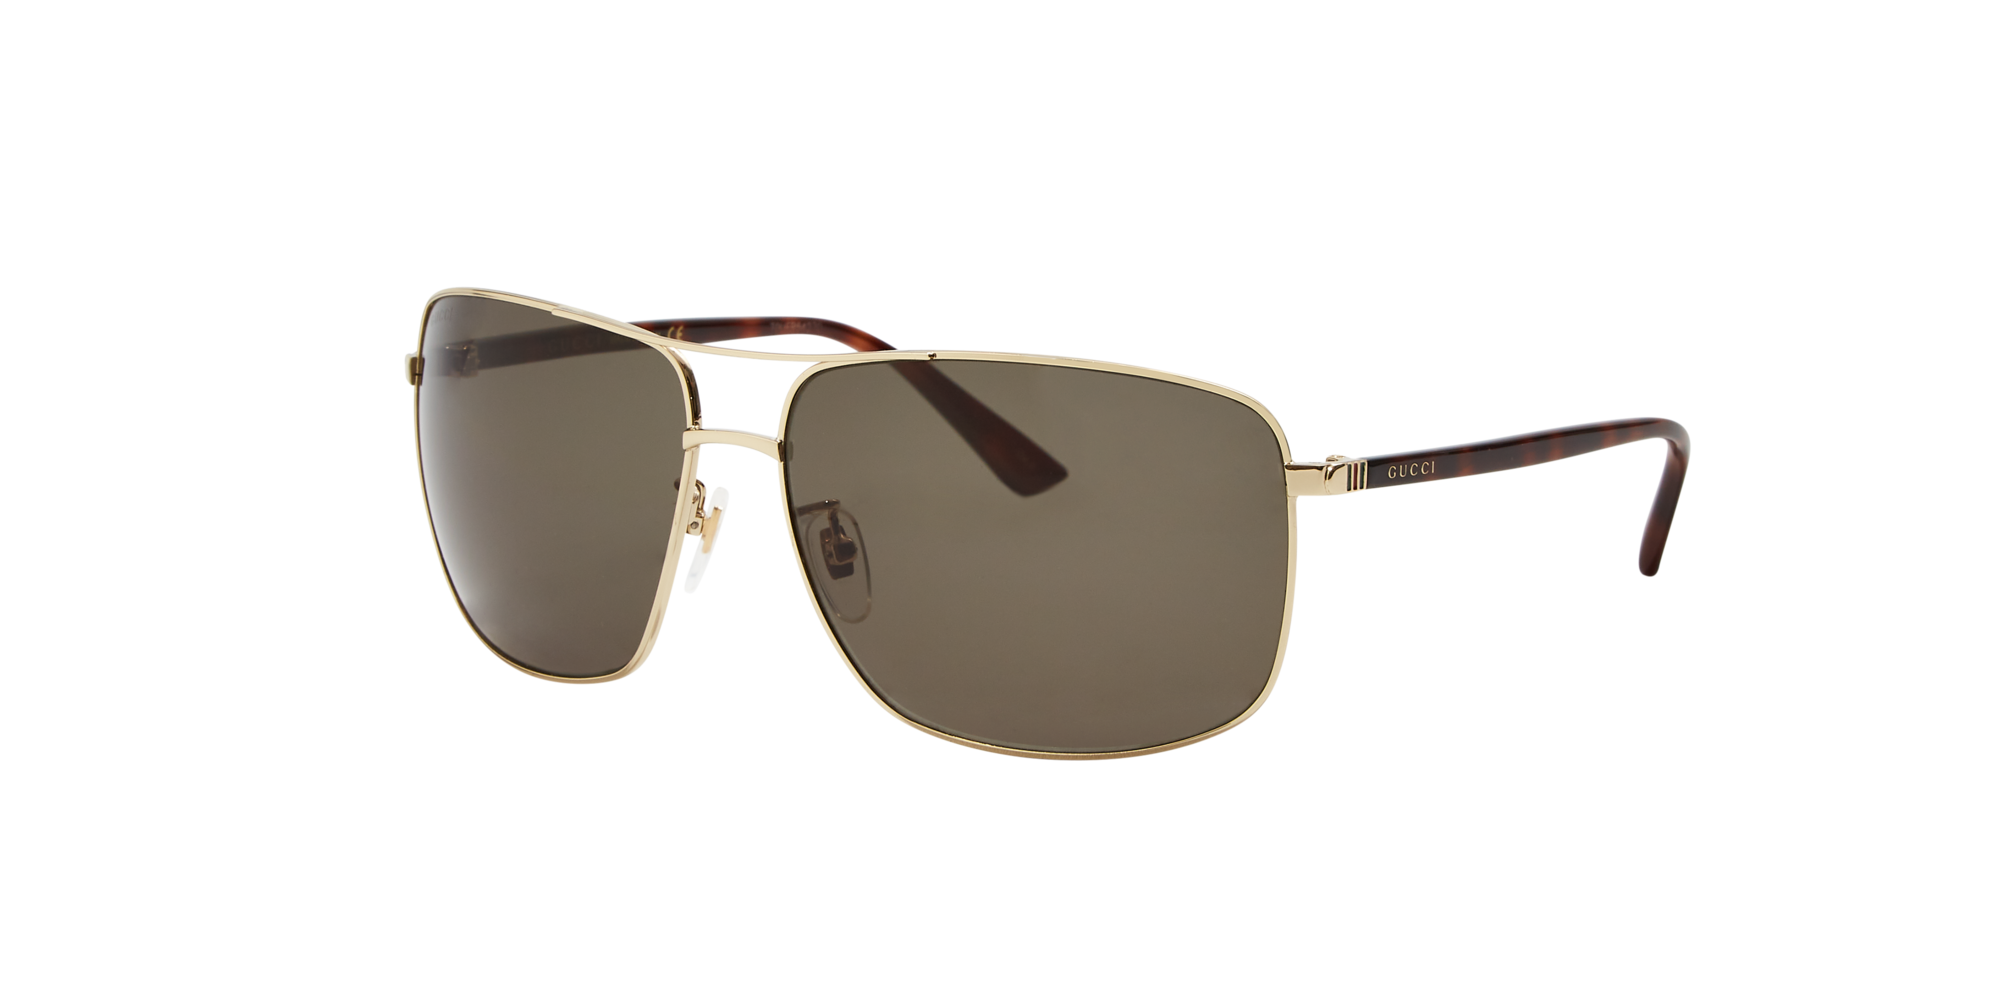 house of fraser gucci sunglasses